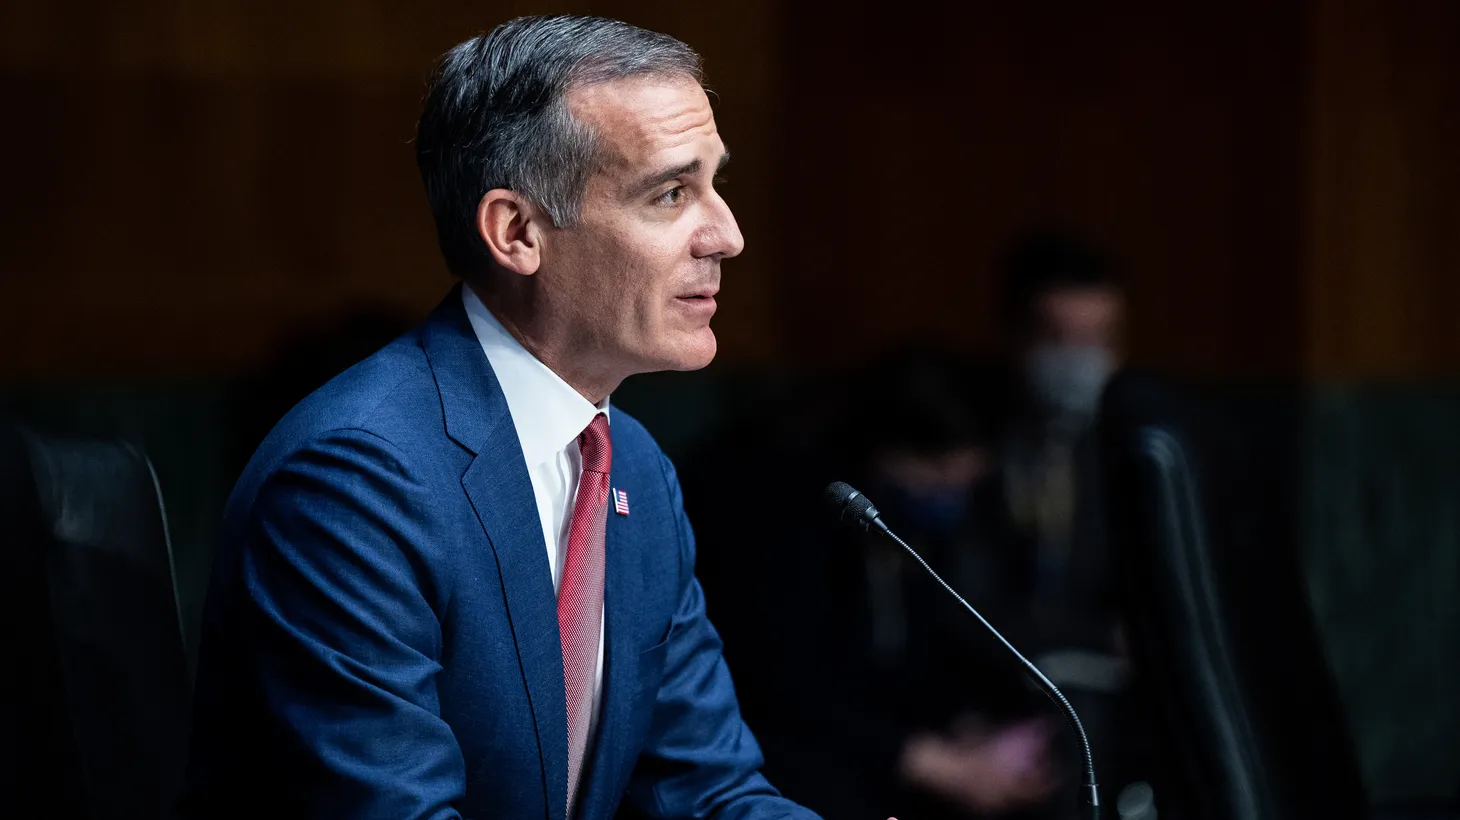 Eric Garcetti, nominee to be ambassador to the Republic of India, speaks at a hearing of the Senate Foreign Relations Committee, December 14, 2021, Washington, DC.